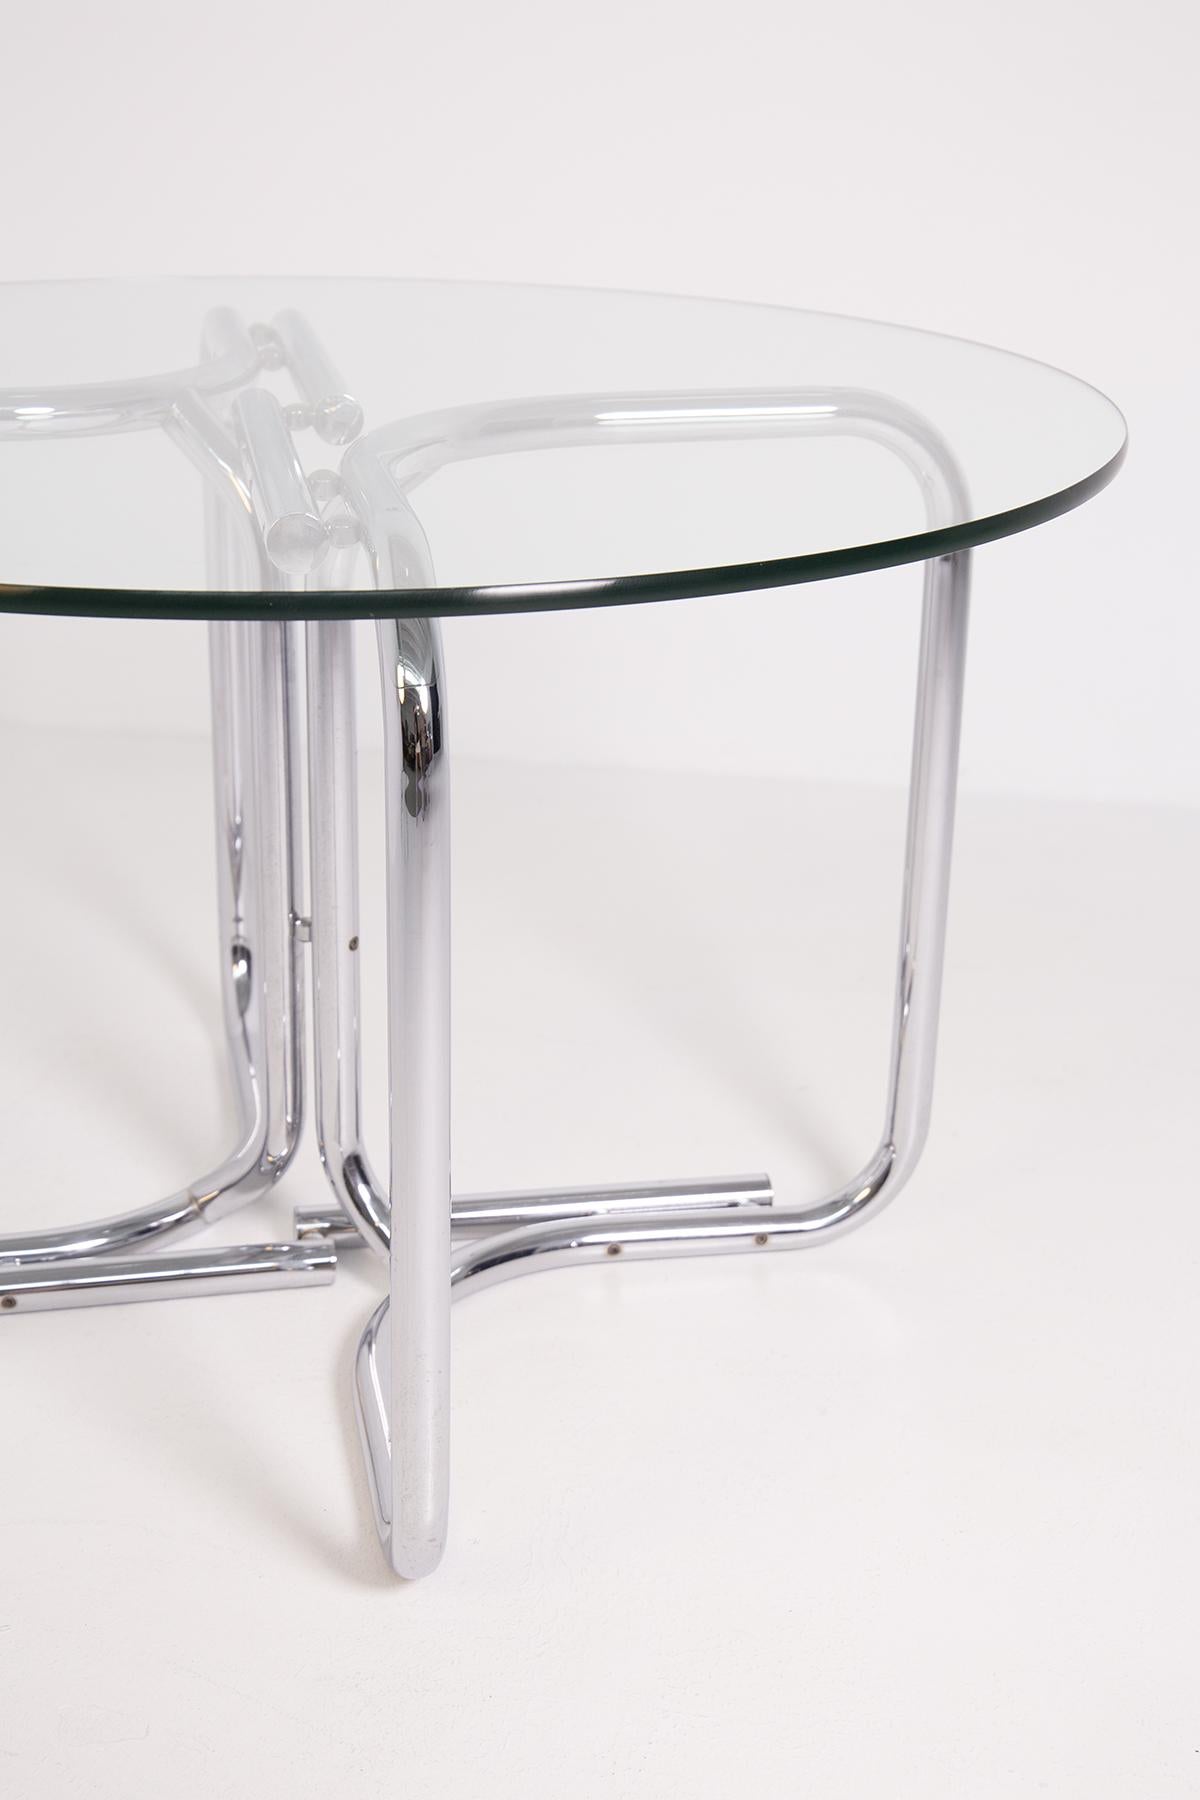 Italian Round Table by Giotto Stoppino in Steel and Glass 1